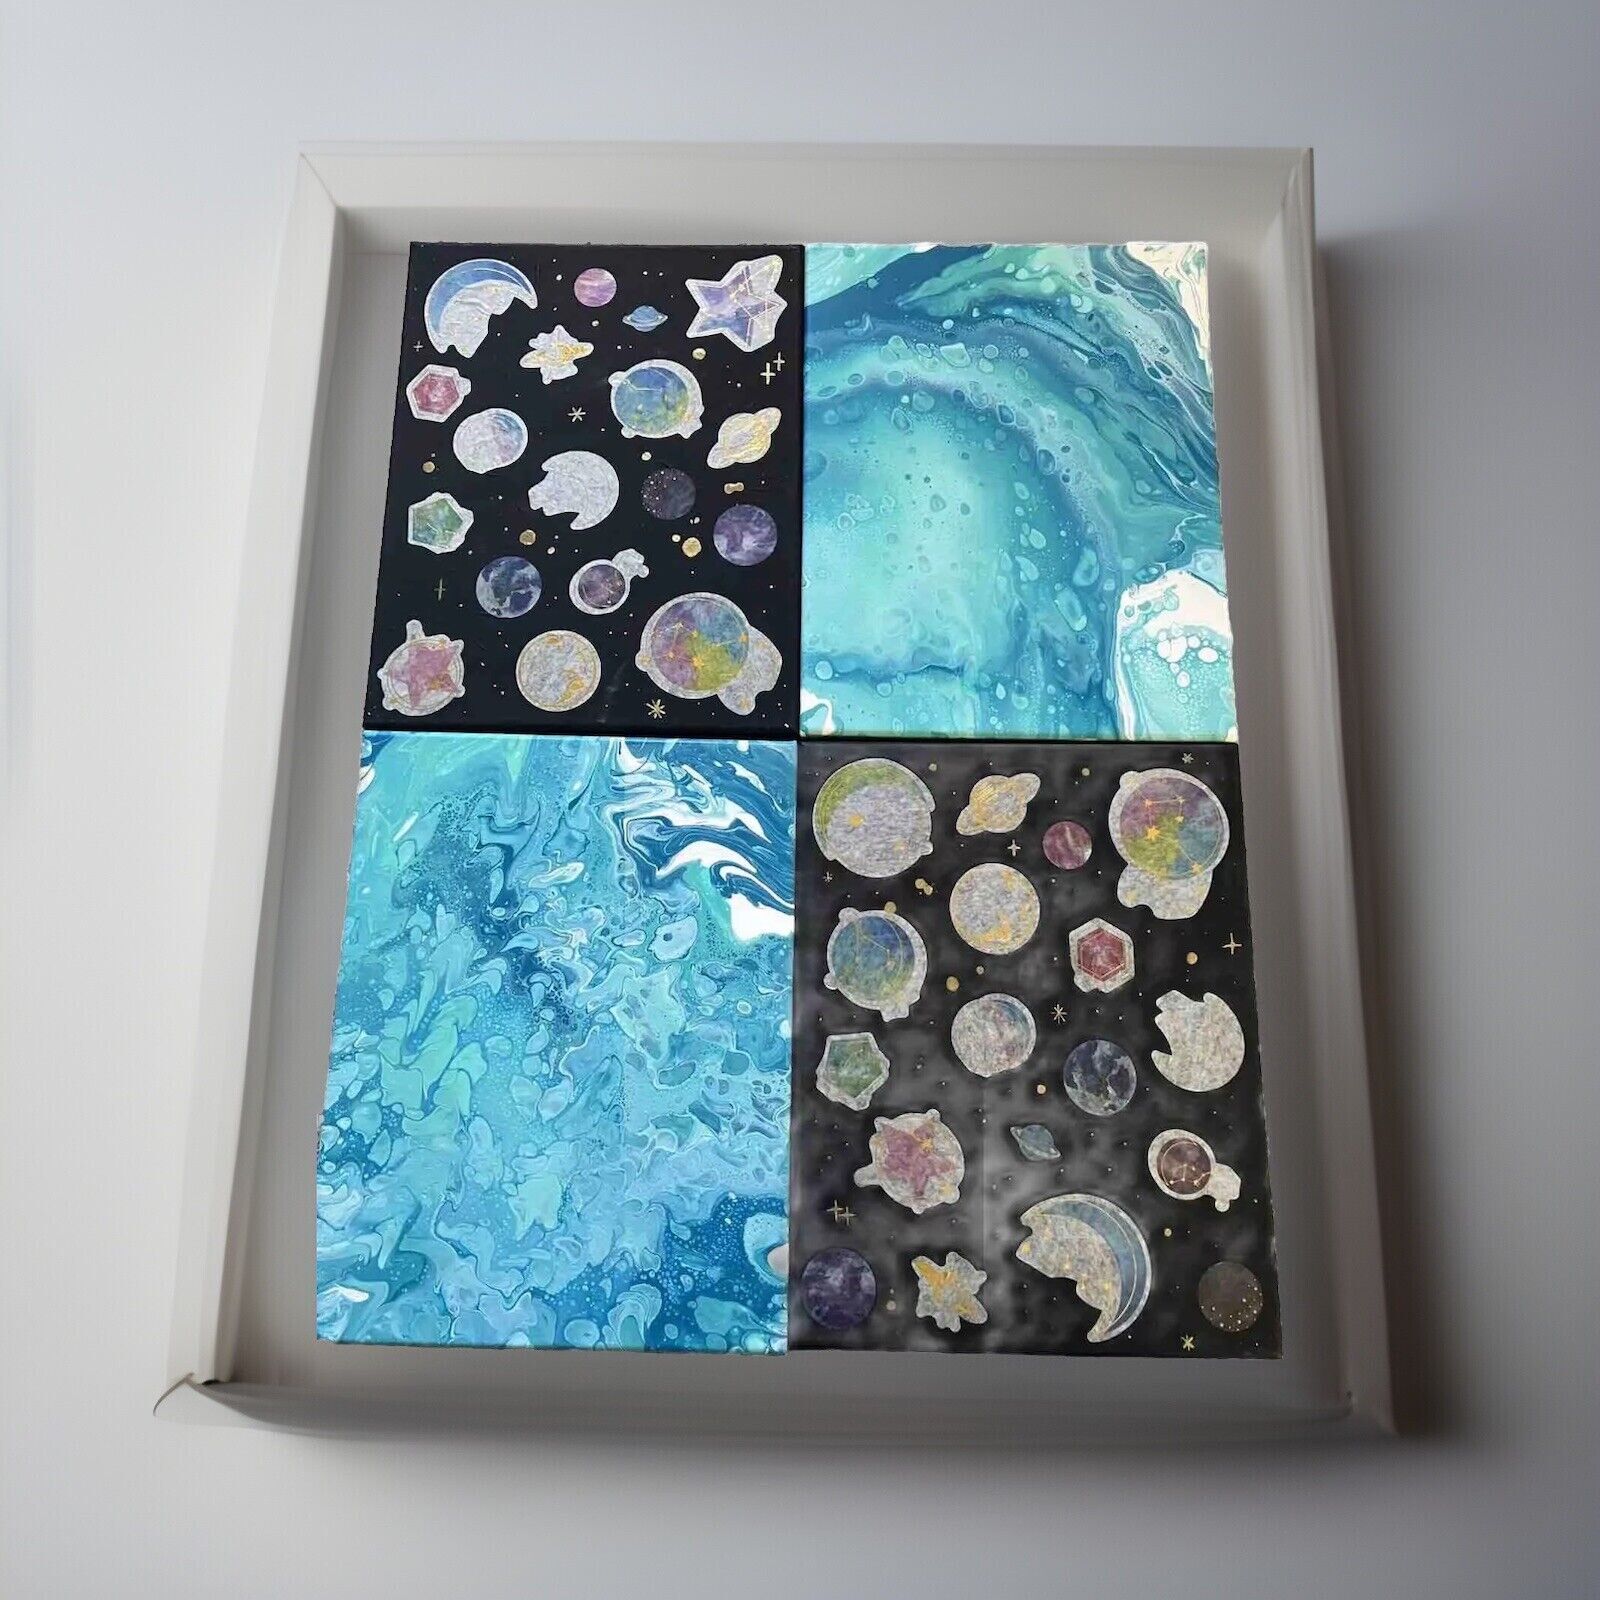 4 , 11 X 14  Original Art Paintings,Added Adhesive Planets, Combine Or Separate